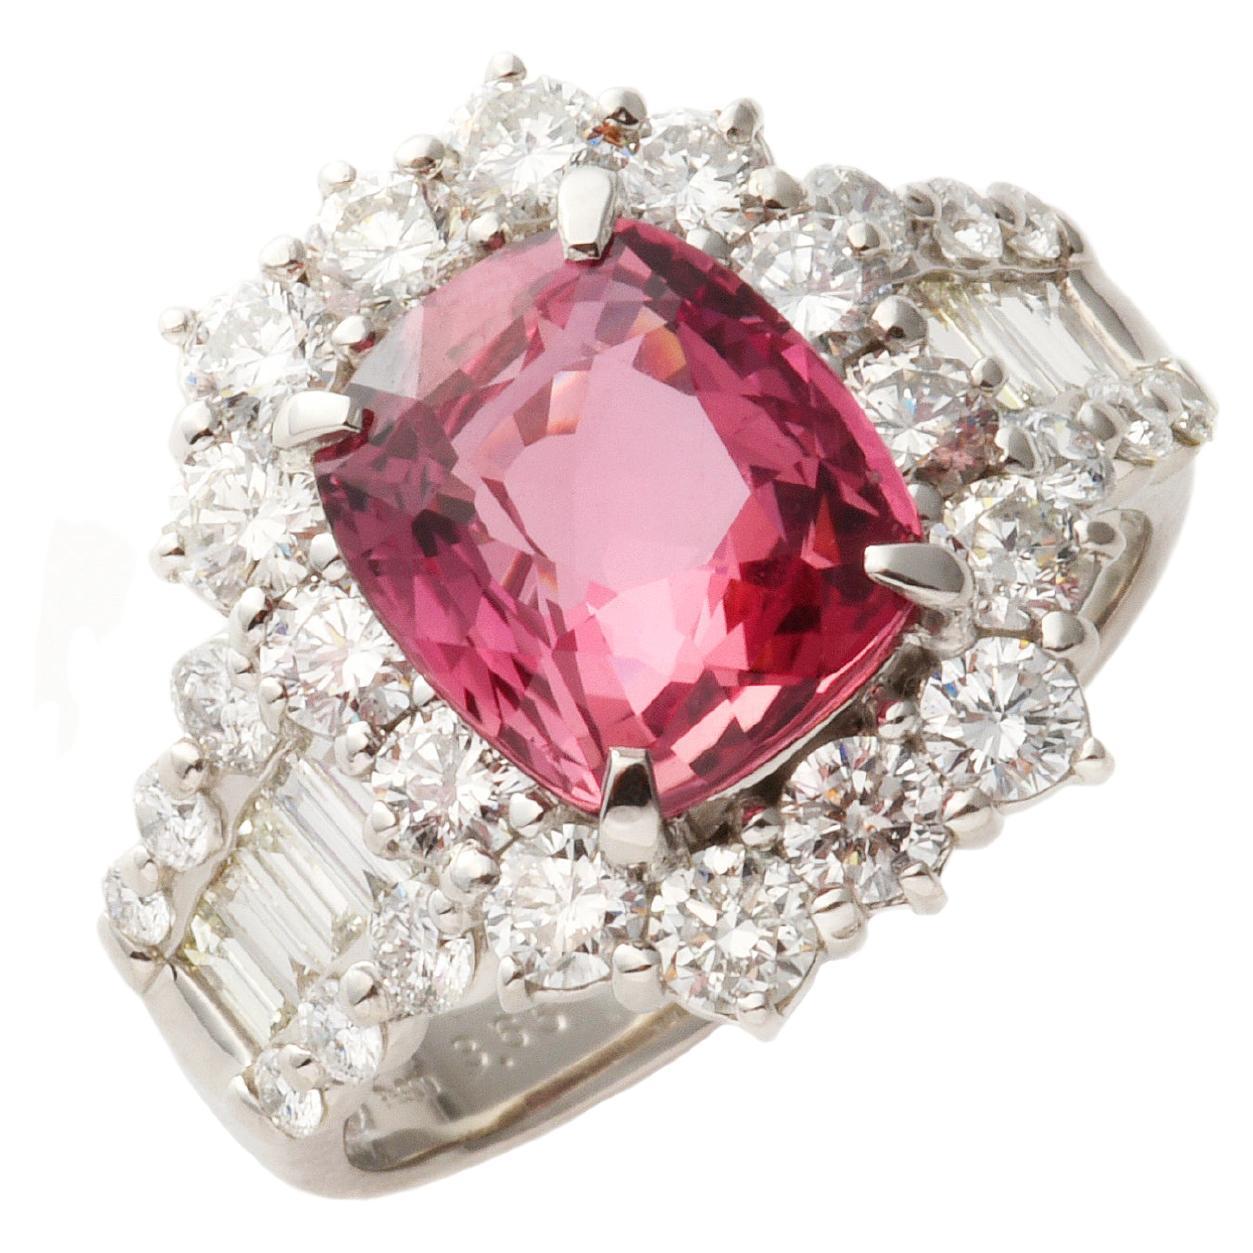 GIA Certified 3.65 ct "Padparadscha" Sapphire Ring